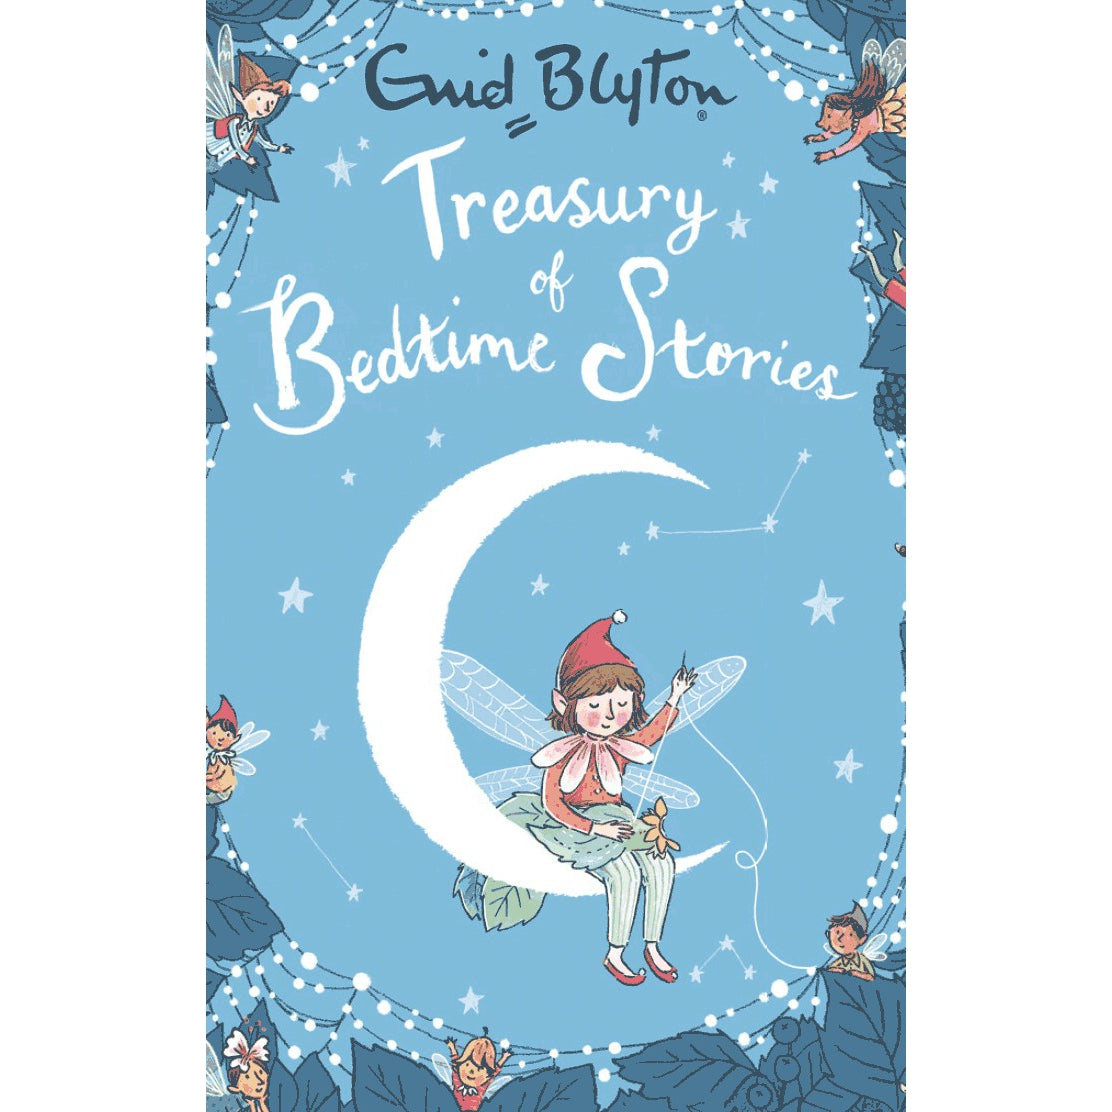 Yoto Card - Treasury of Bedtime Stories by Enid Blyton - Child Friendly Audio Story Card for the Yoto Player